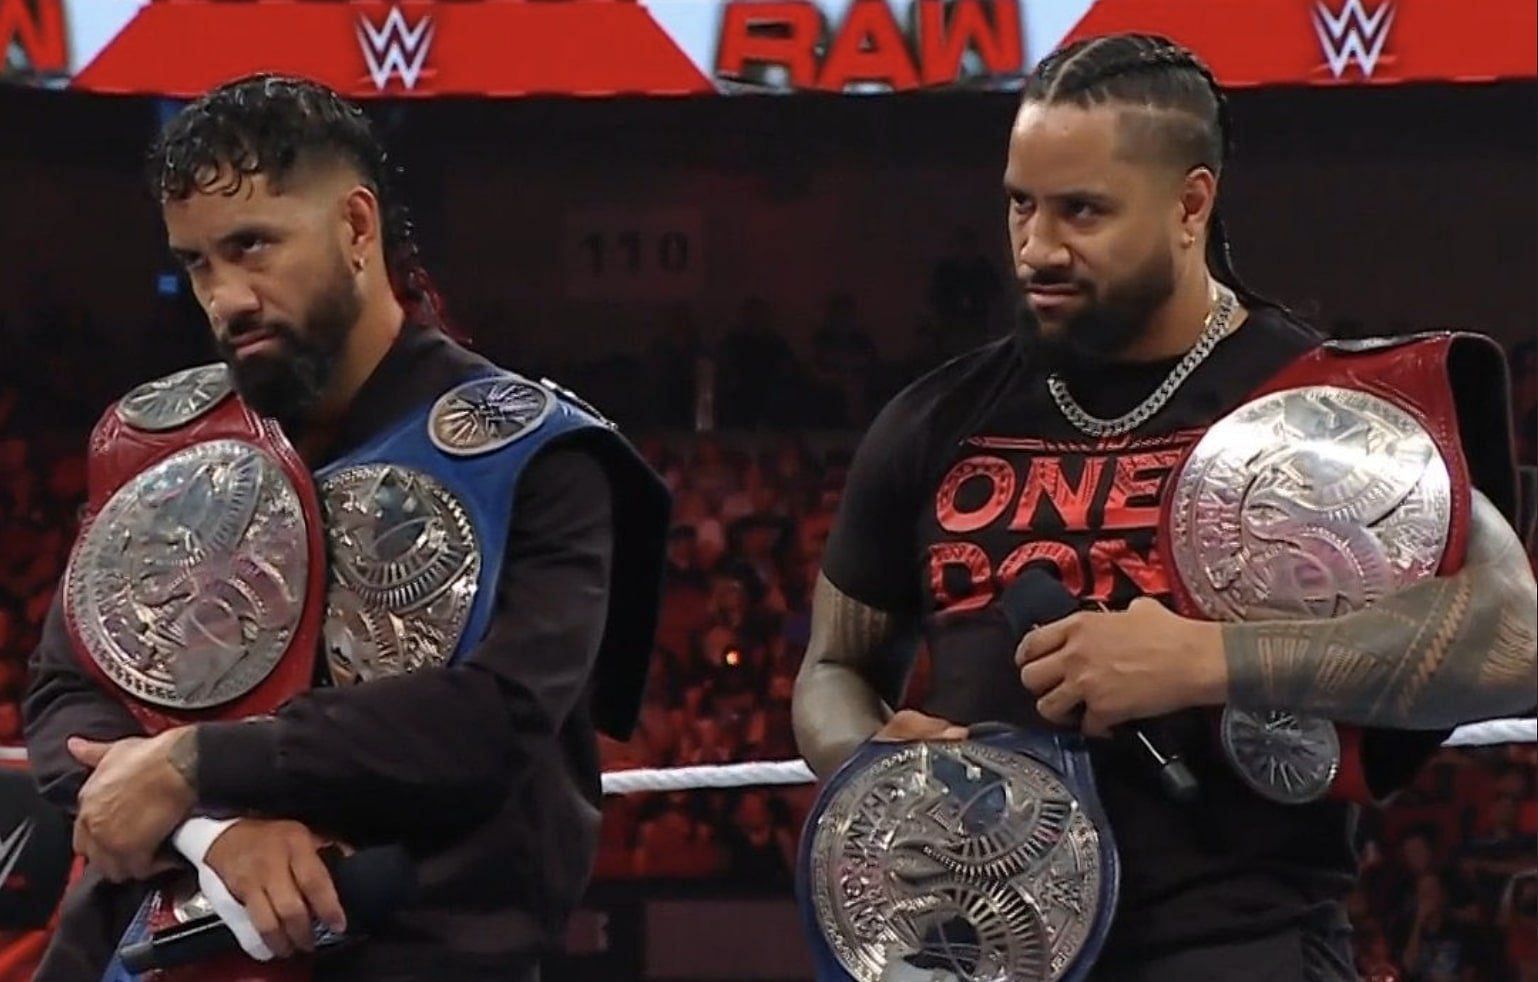 The Usos have been tag team Champions for a very long time.